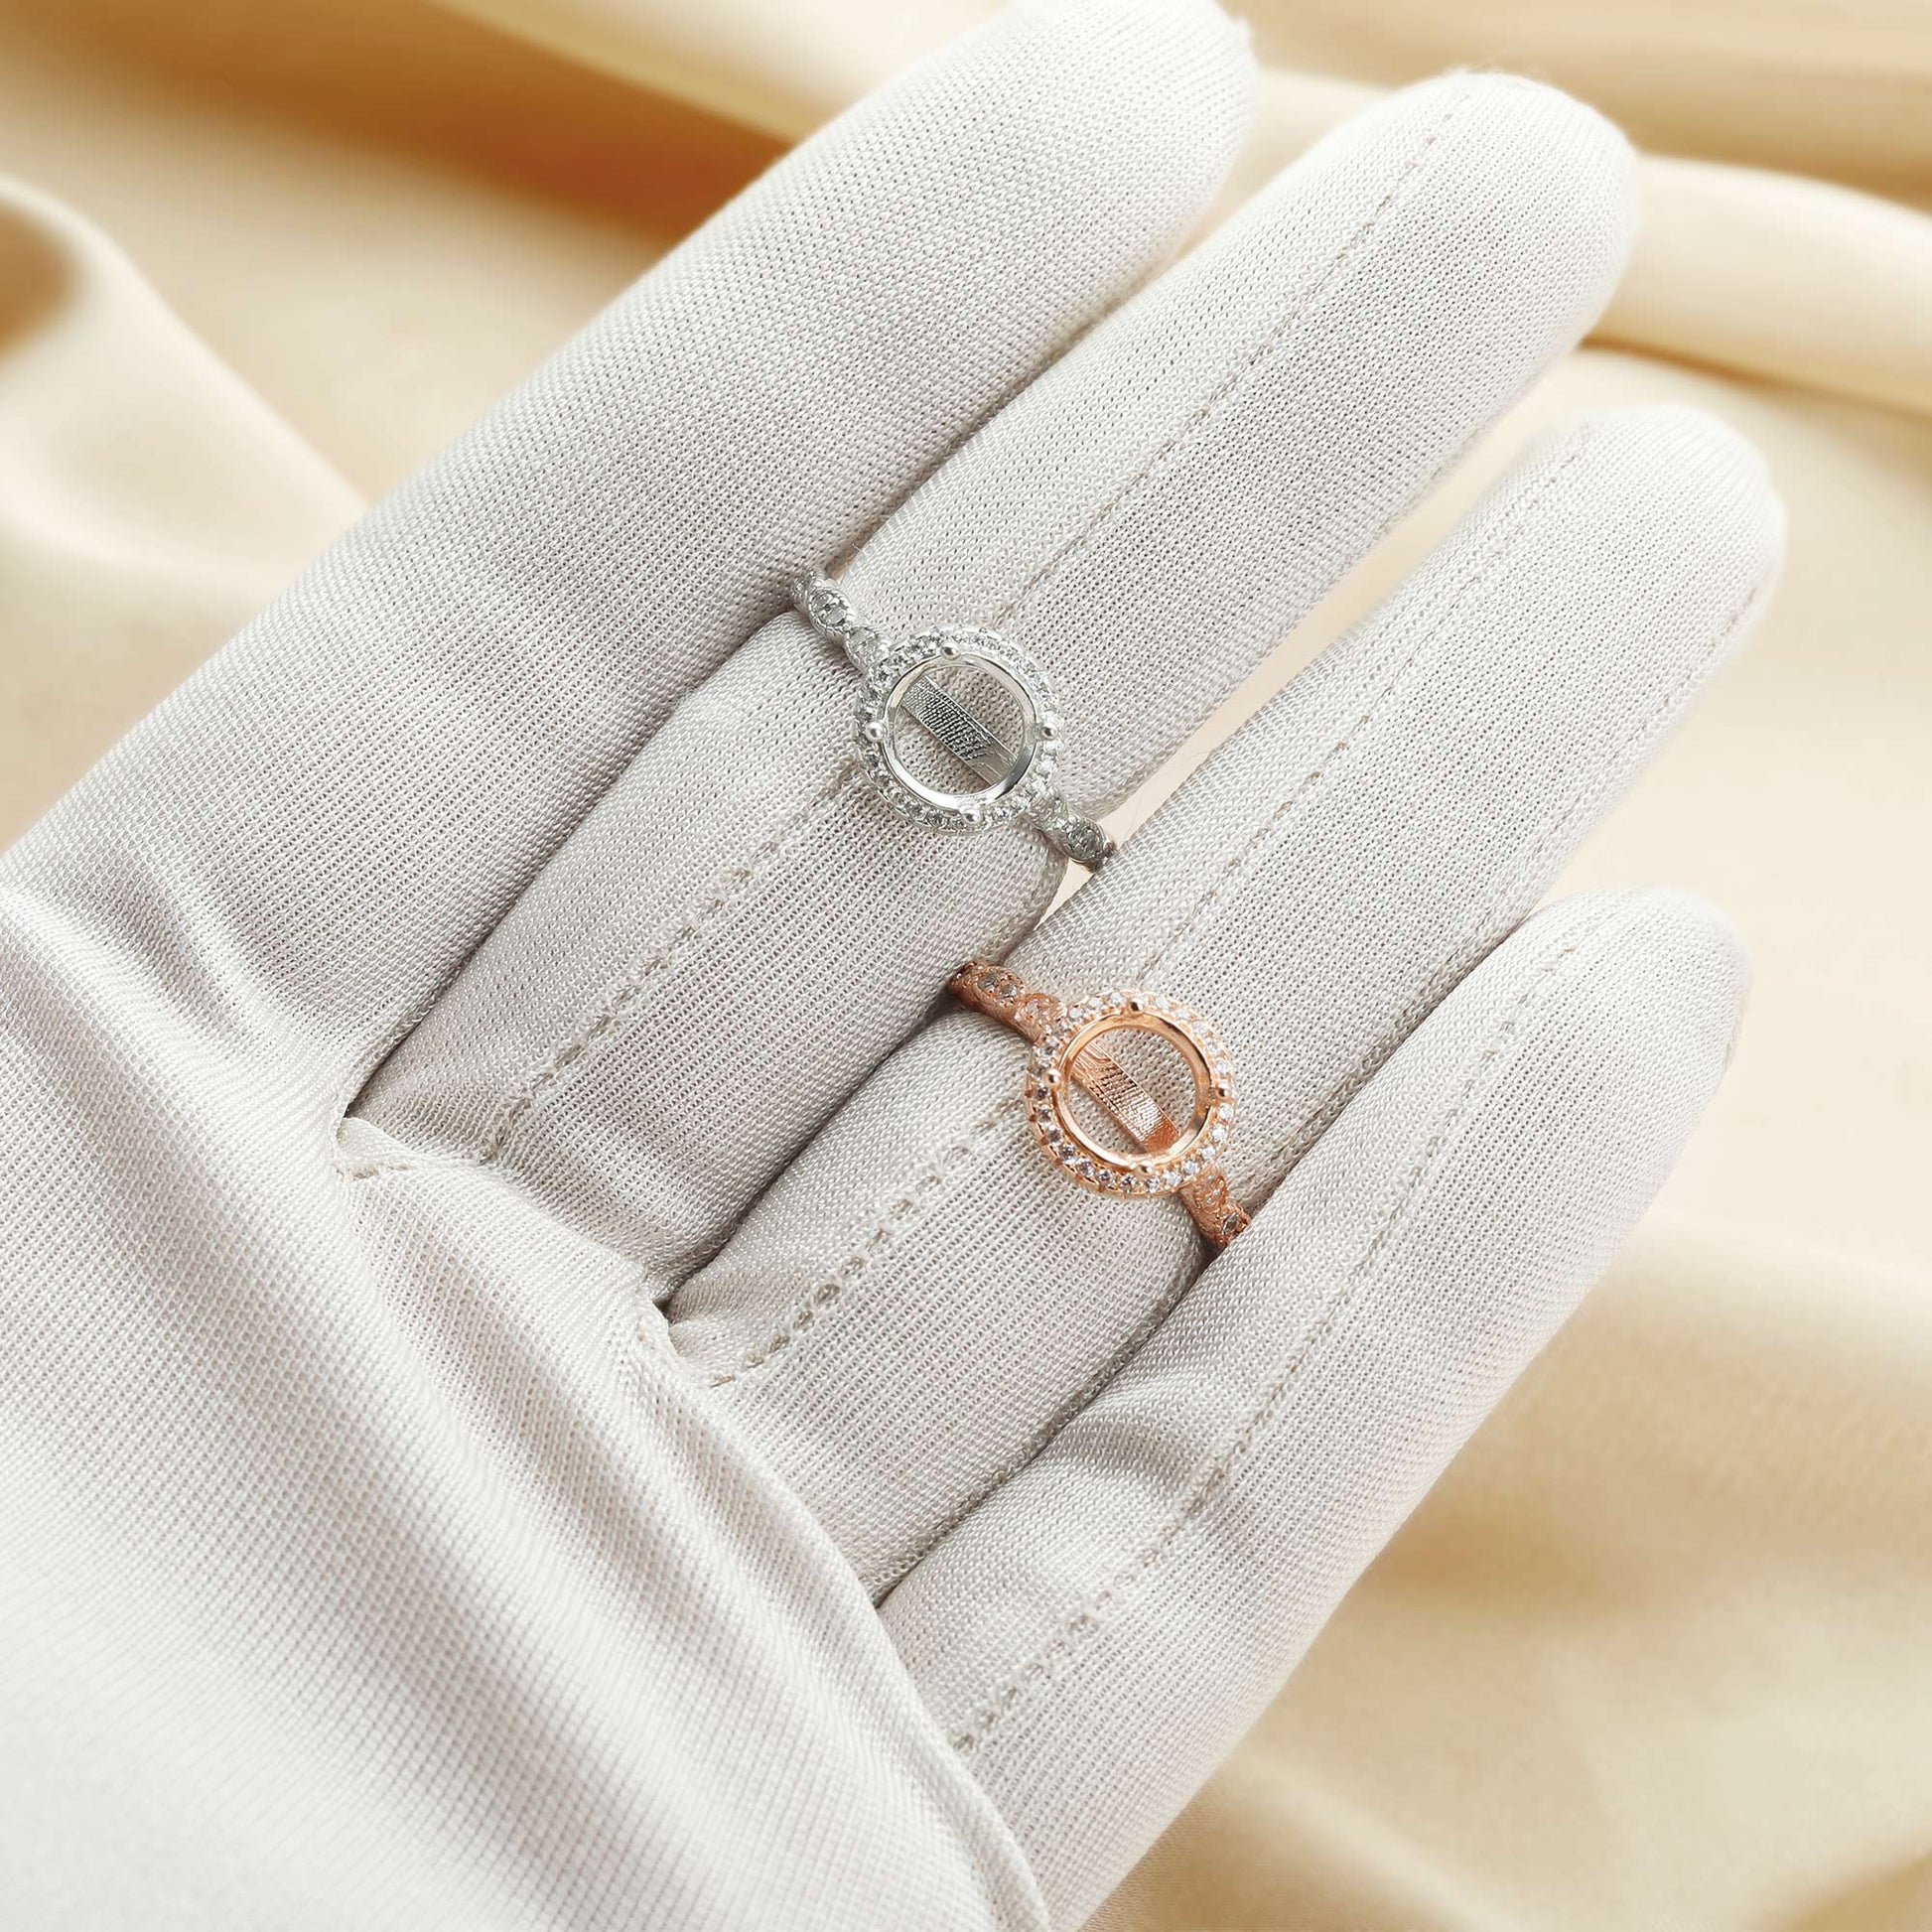 A silver round halo art deco style semi mount and a identical rose gold semi mount worn on a hand.